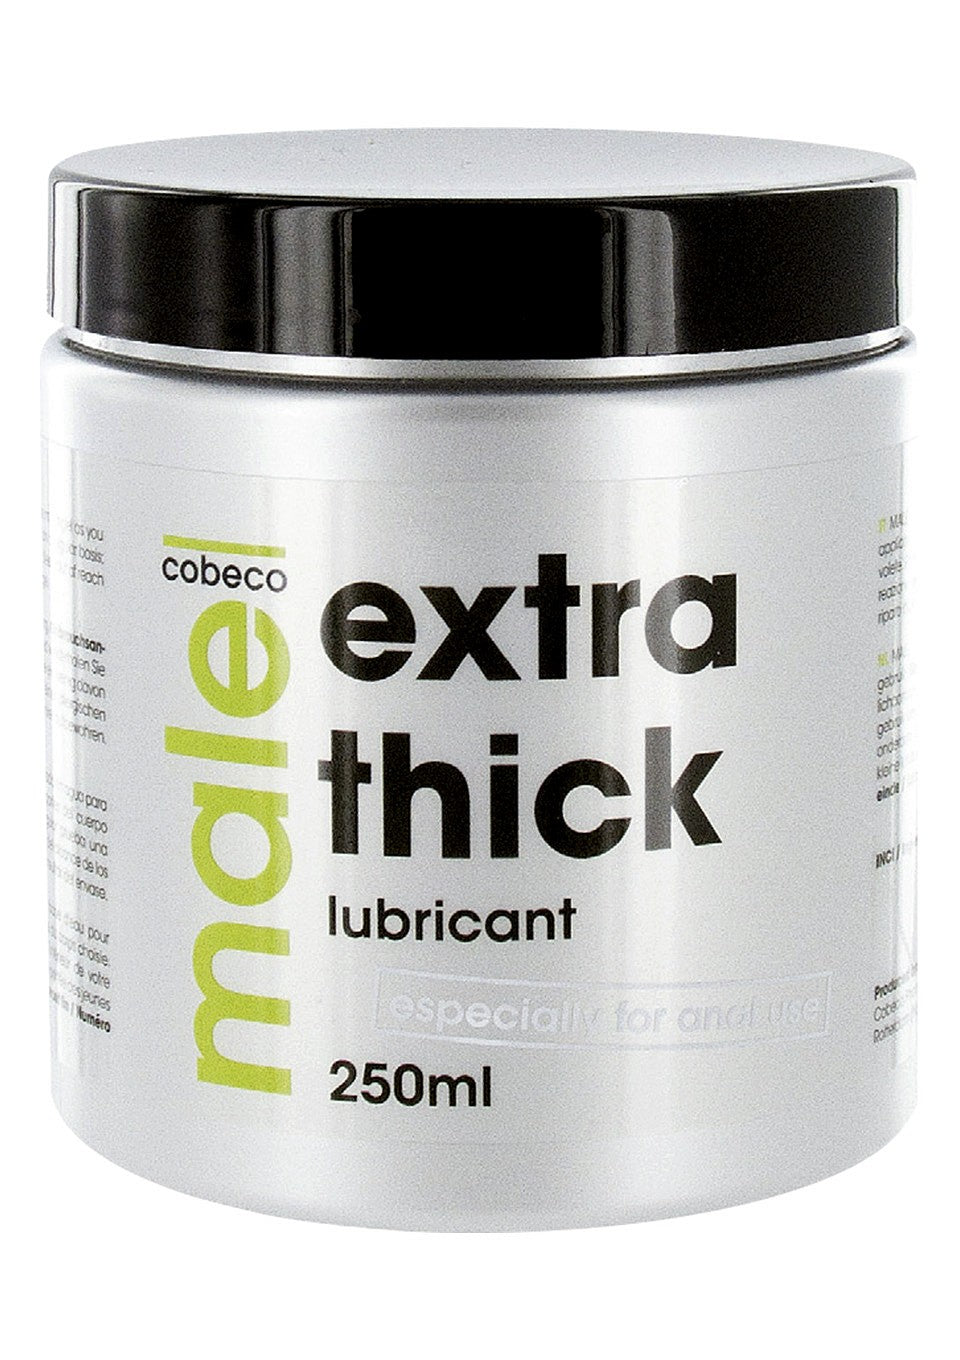 Cobeco Male Lubricant Extra Thick 250ml 509 250 - 0